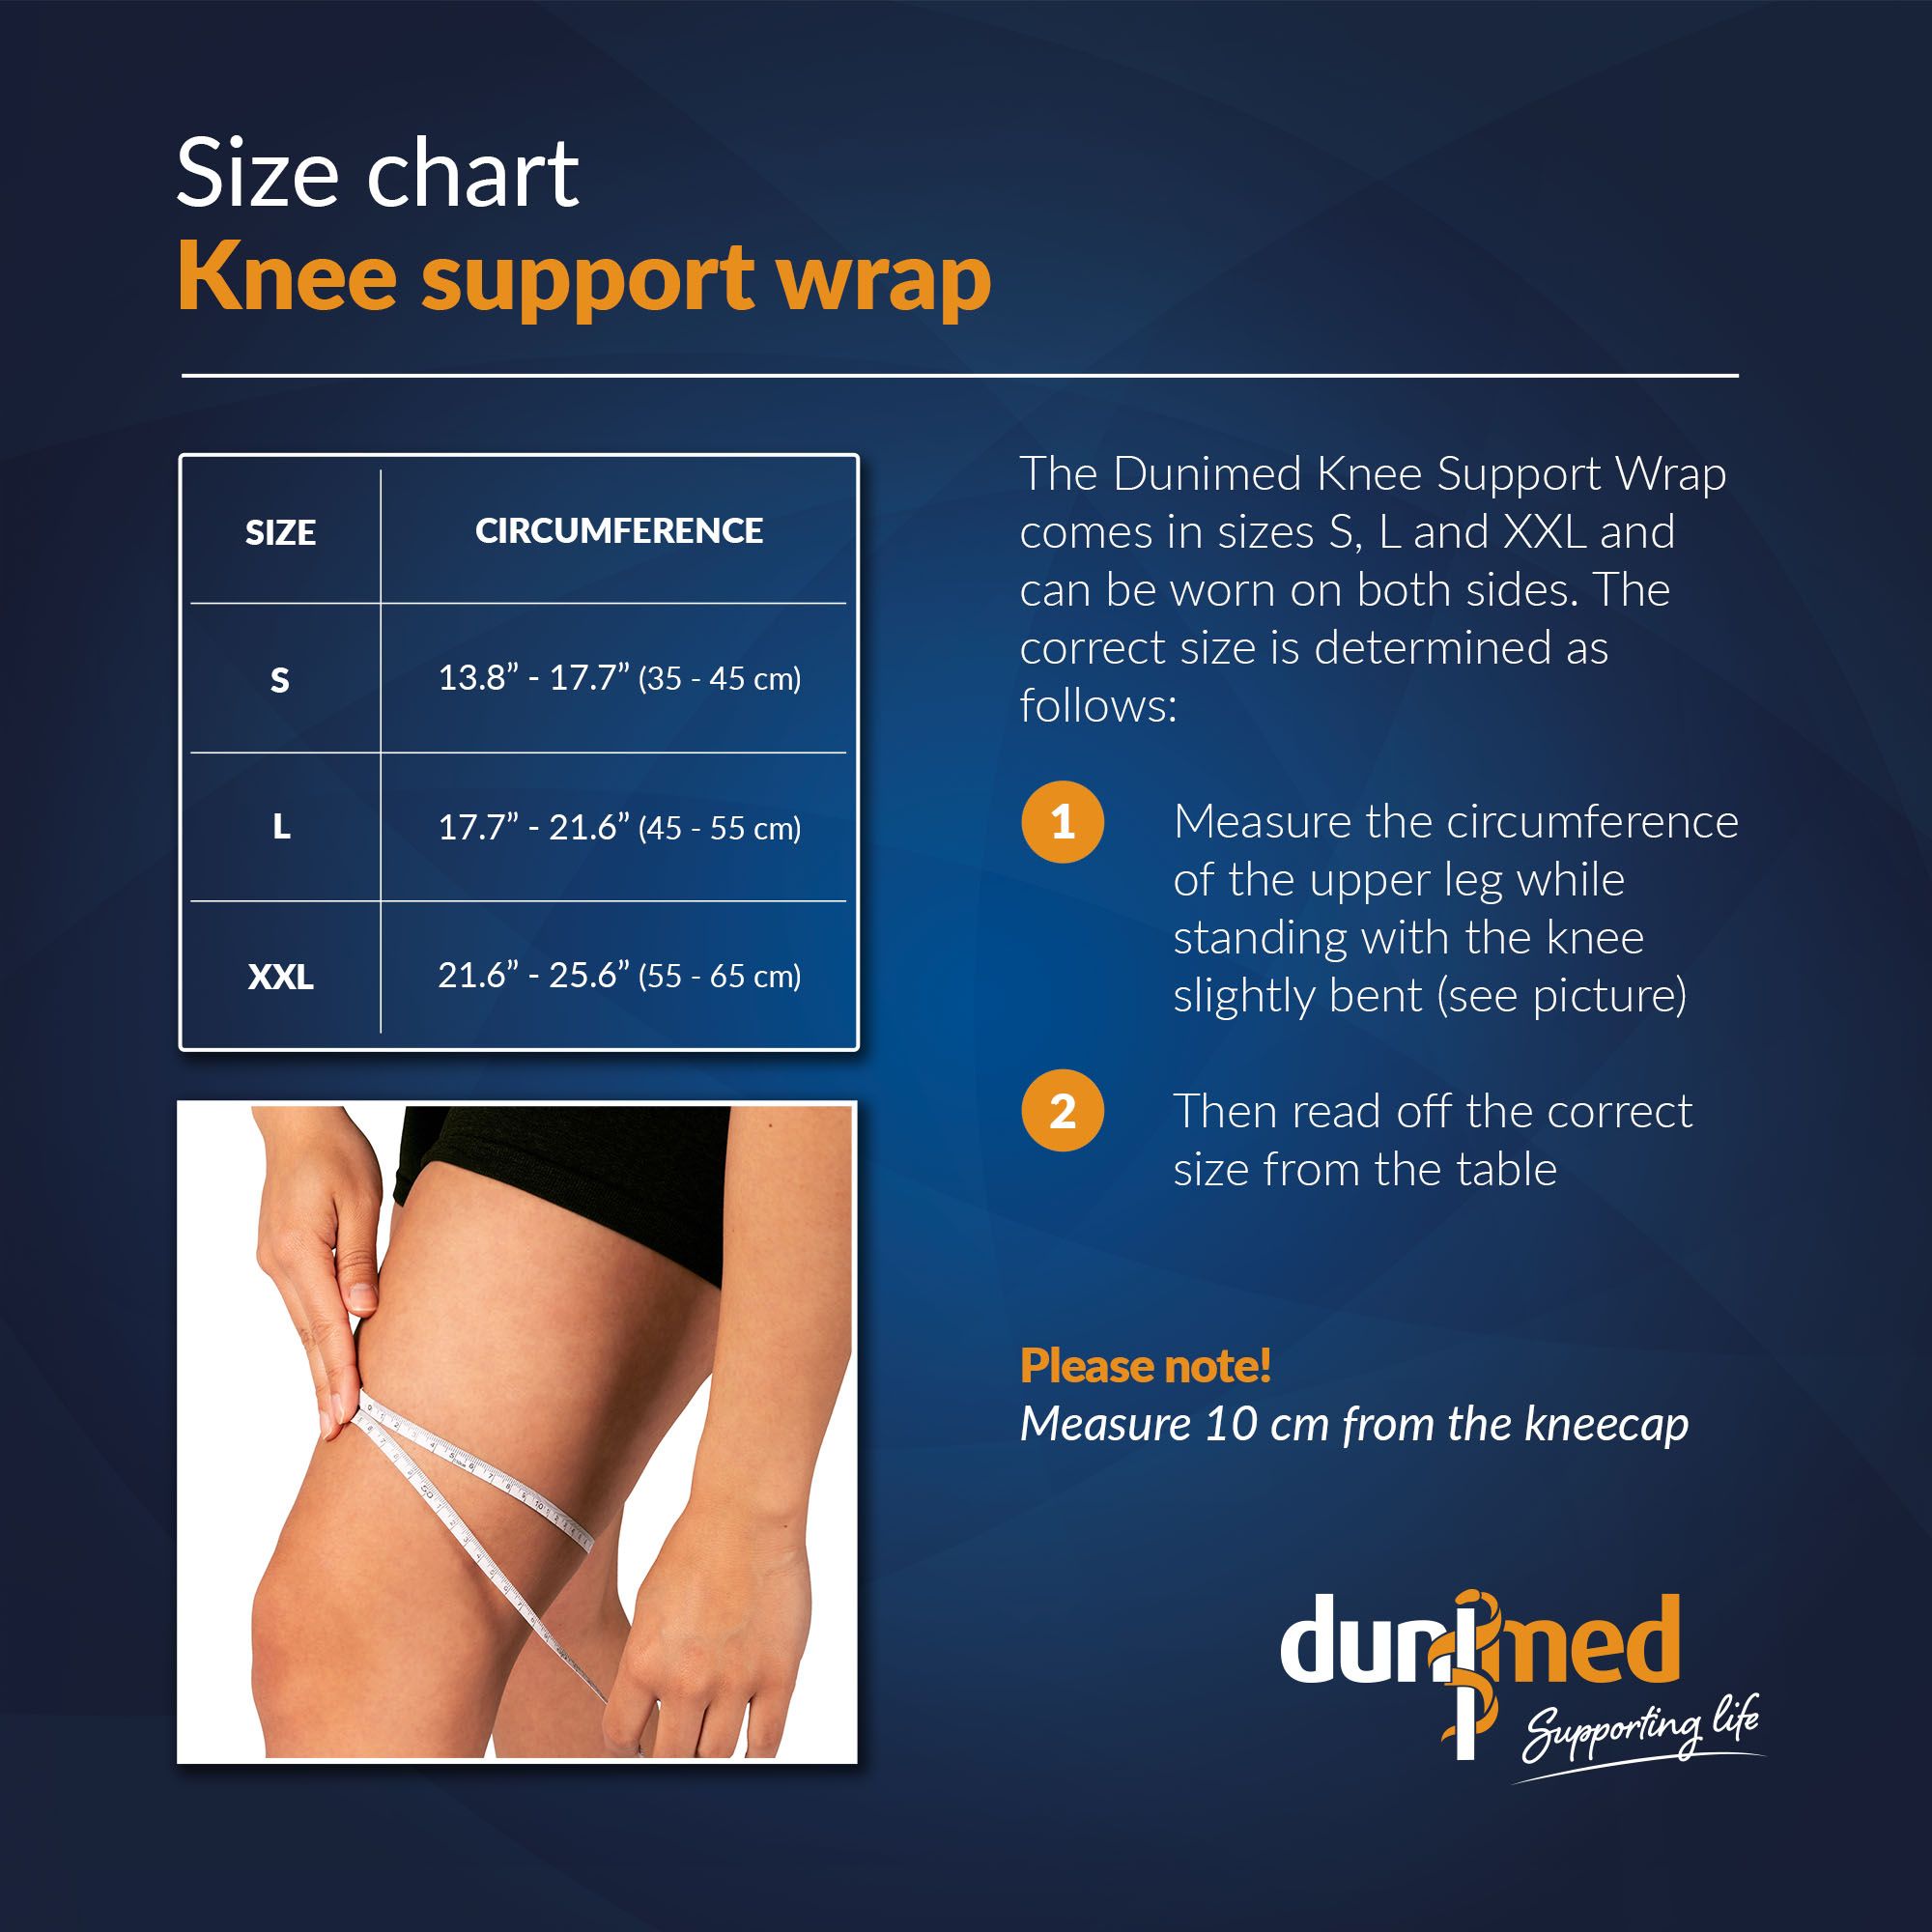 Size chart Dunimed Knee Support Wrap